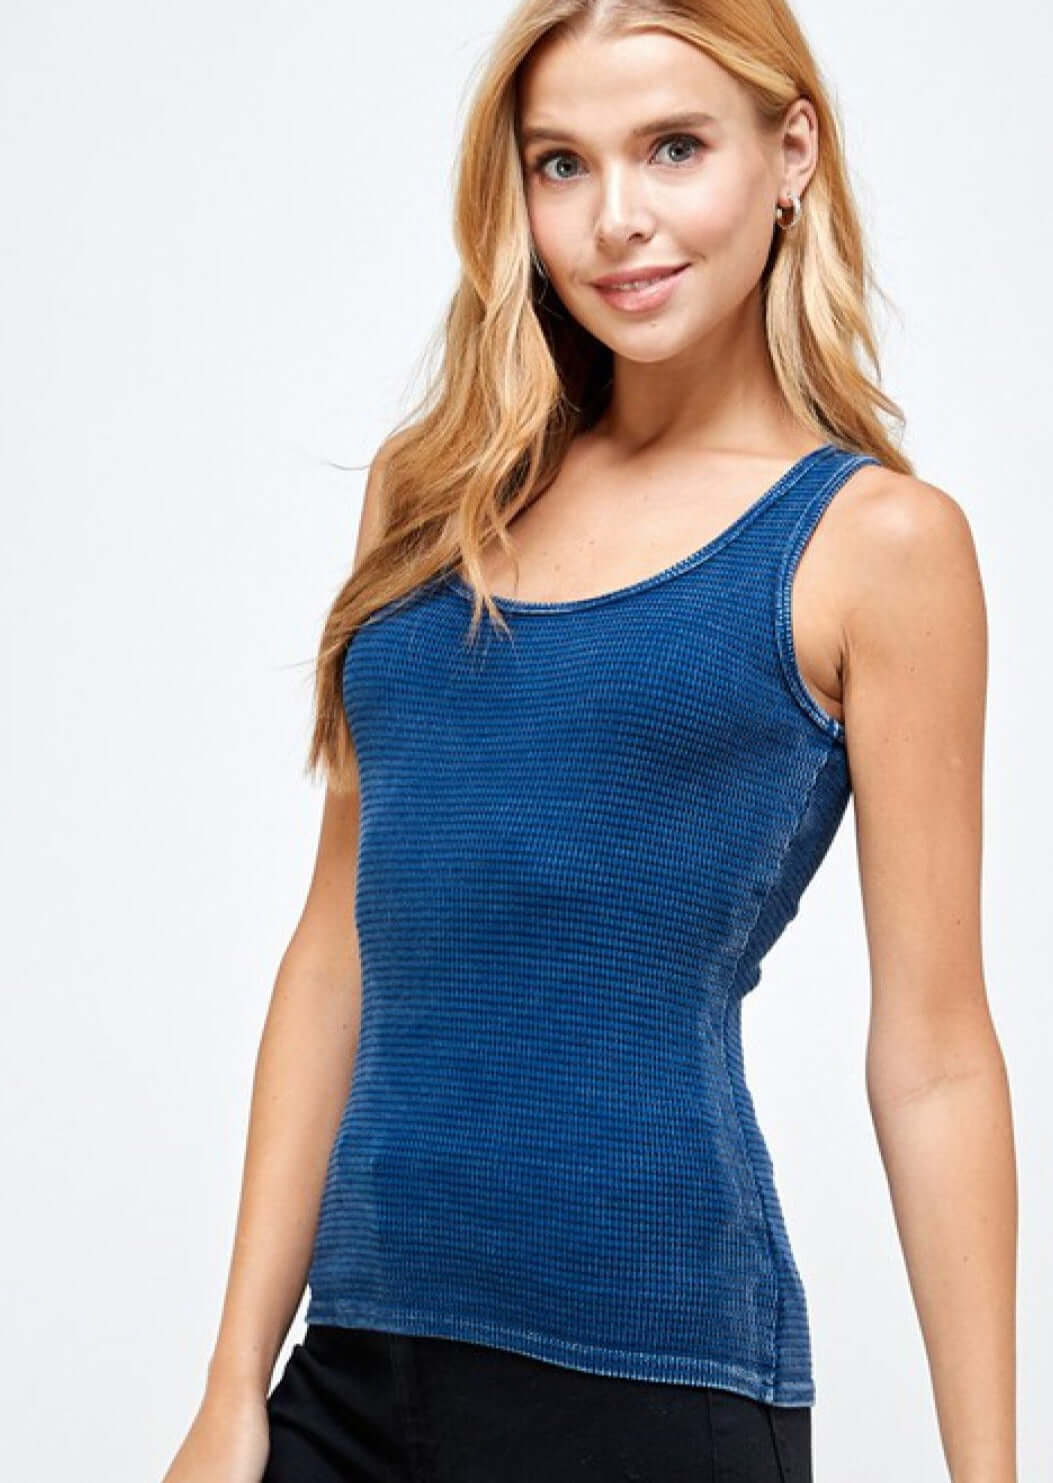 Made in USA Women's Scoop Neck Tank Textured Breathable Thicker Material Garment Washed Fabric Fitted Waist Length 100% Cotton in Blue 